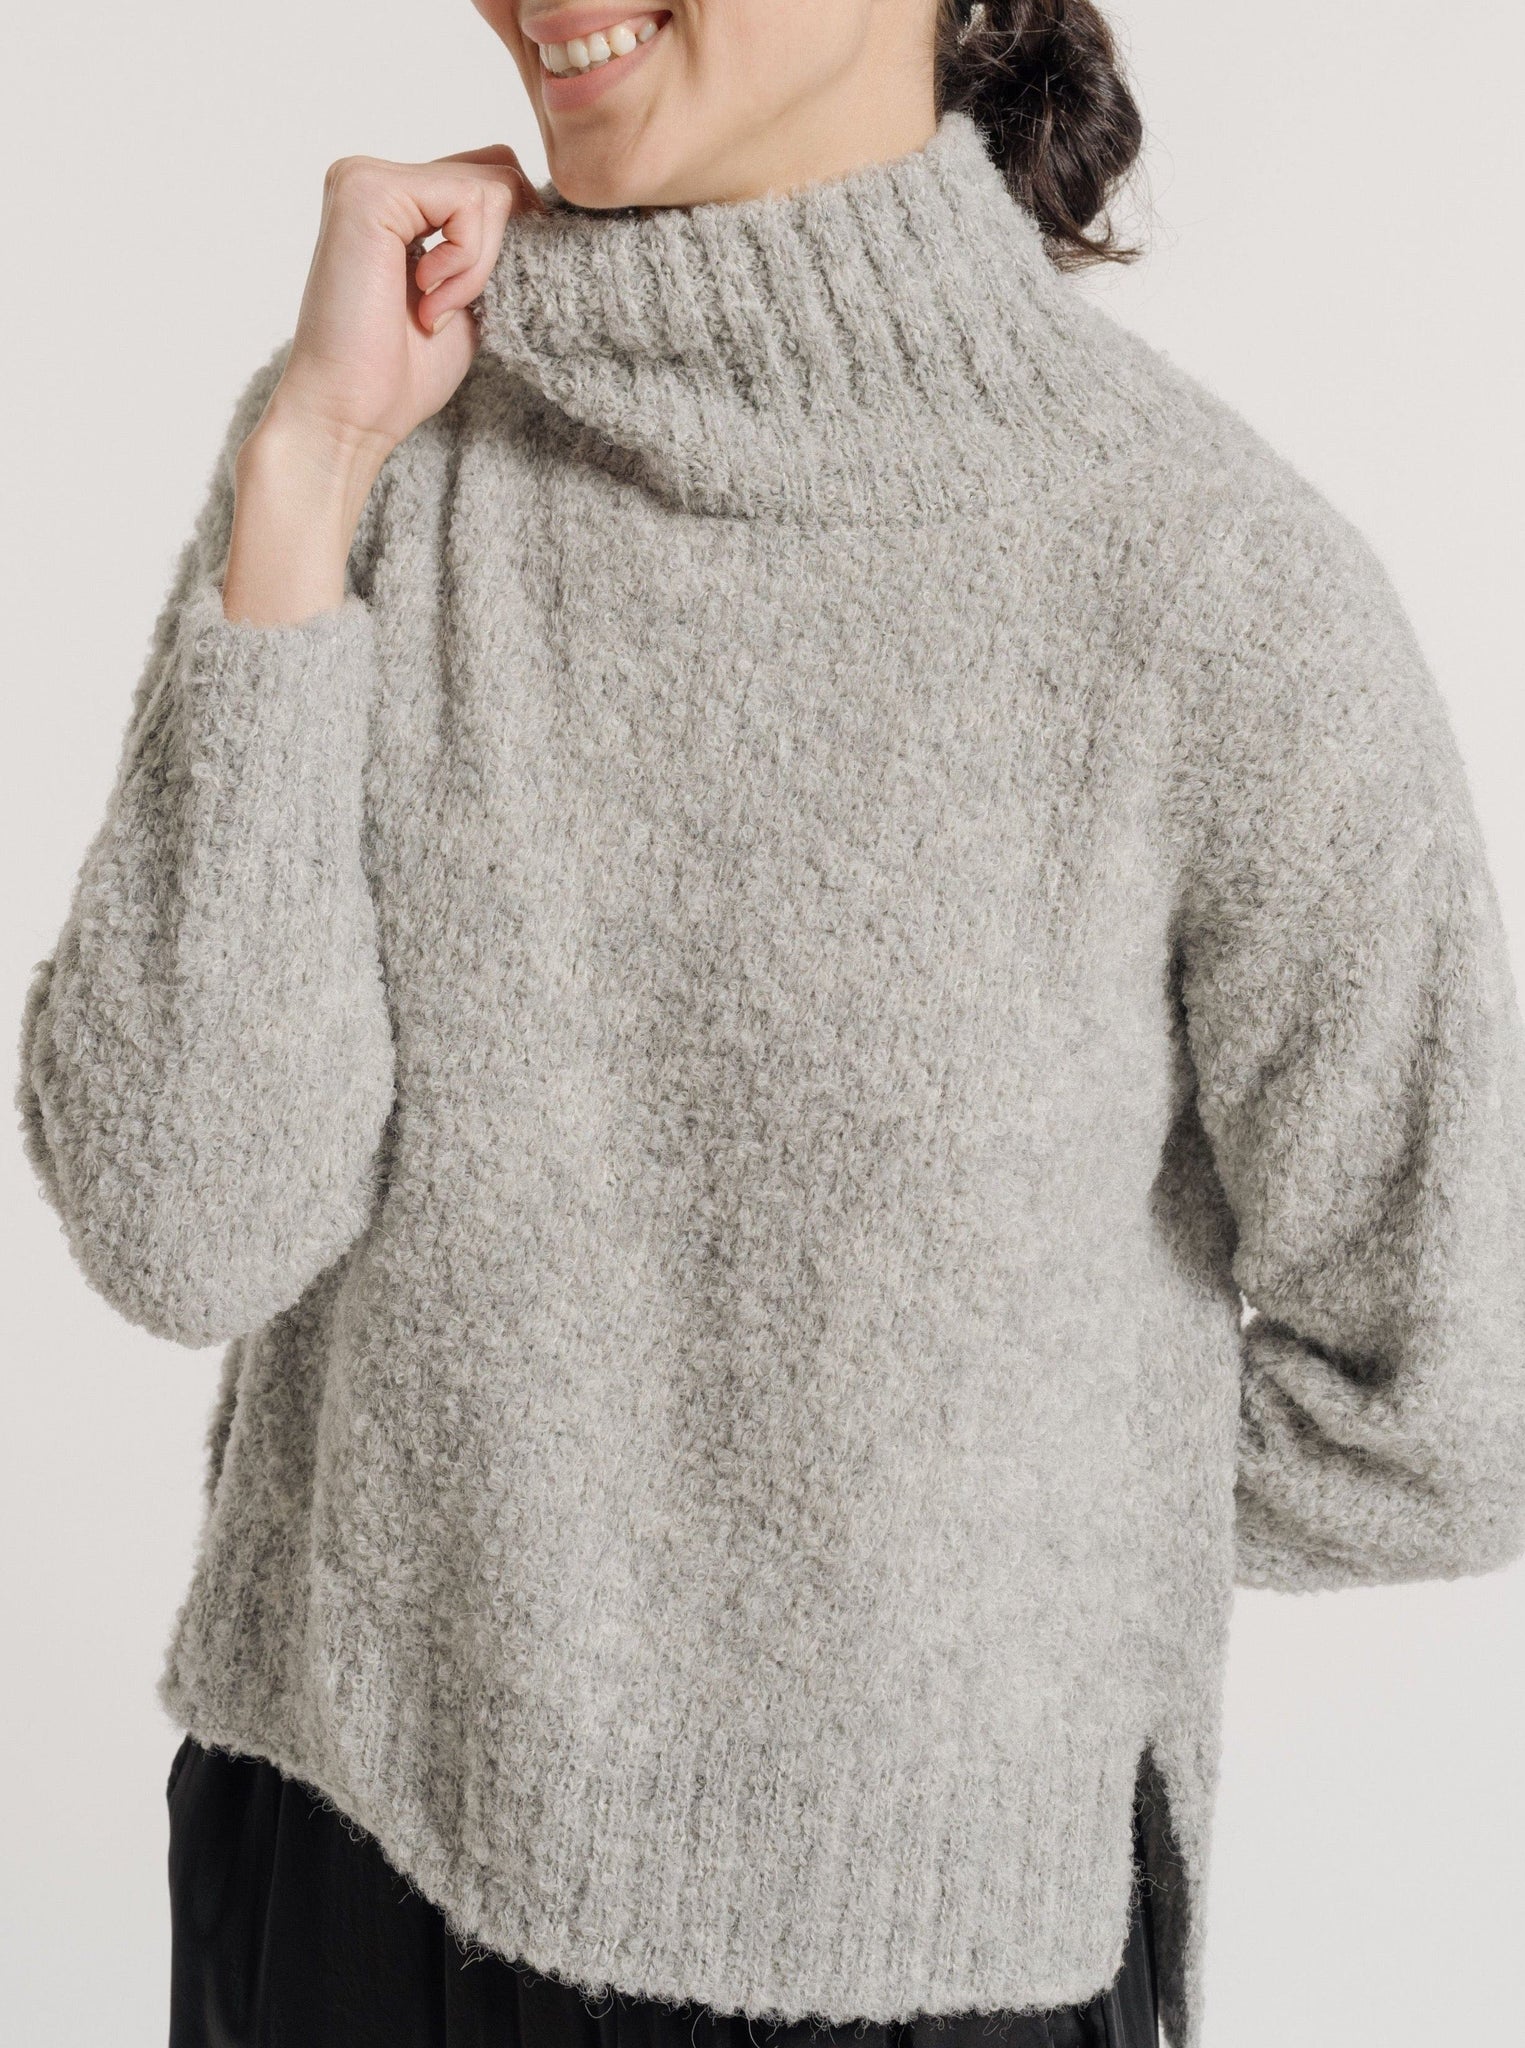 Totto Sweater - Ghost Grey - pre-order